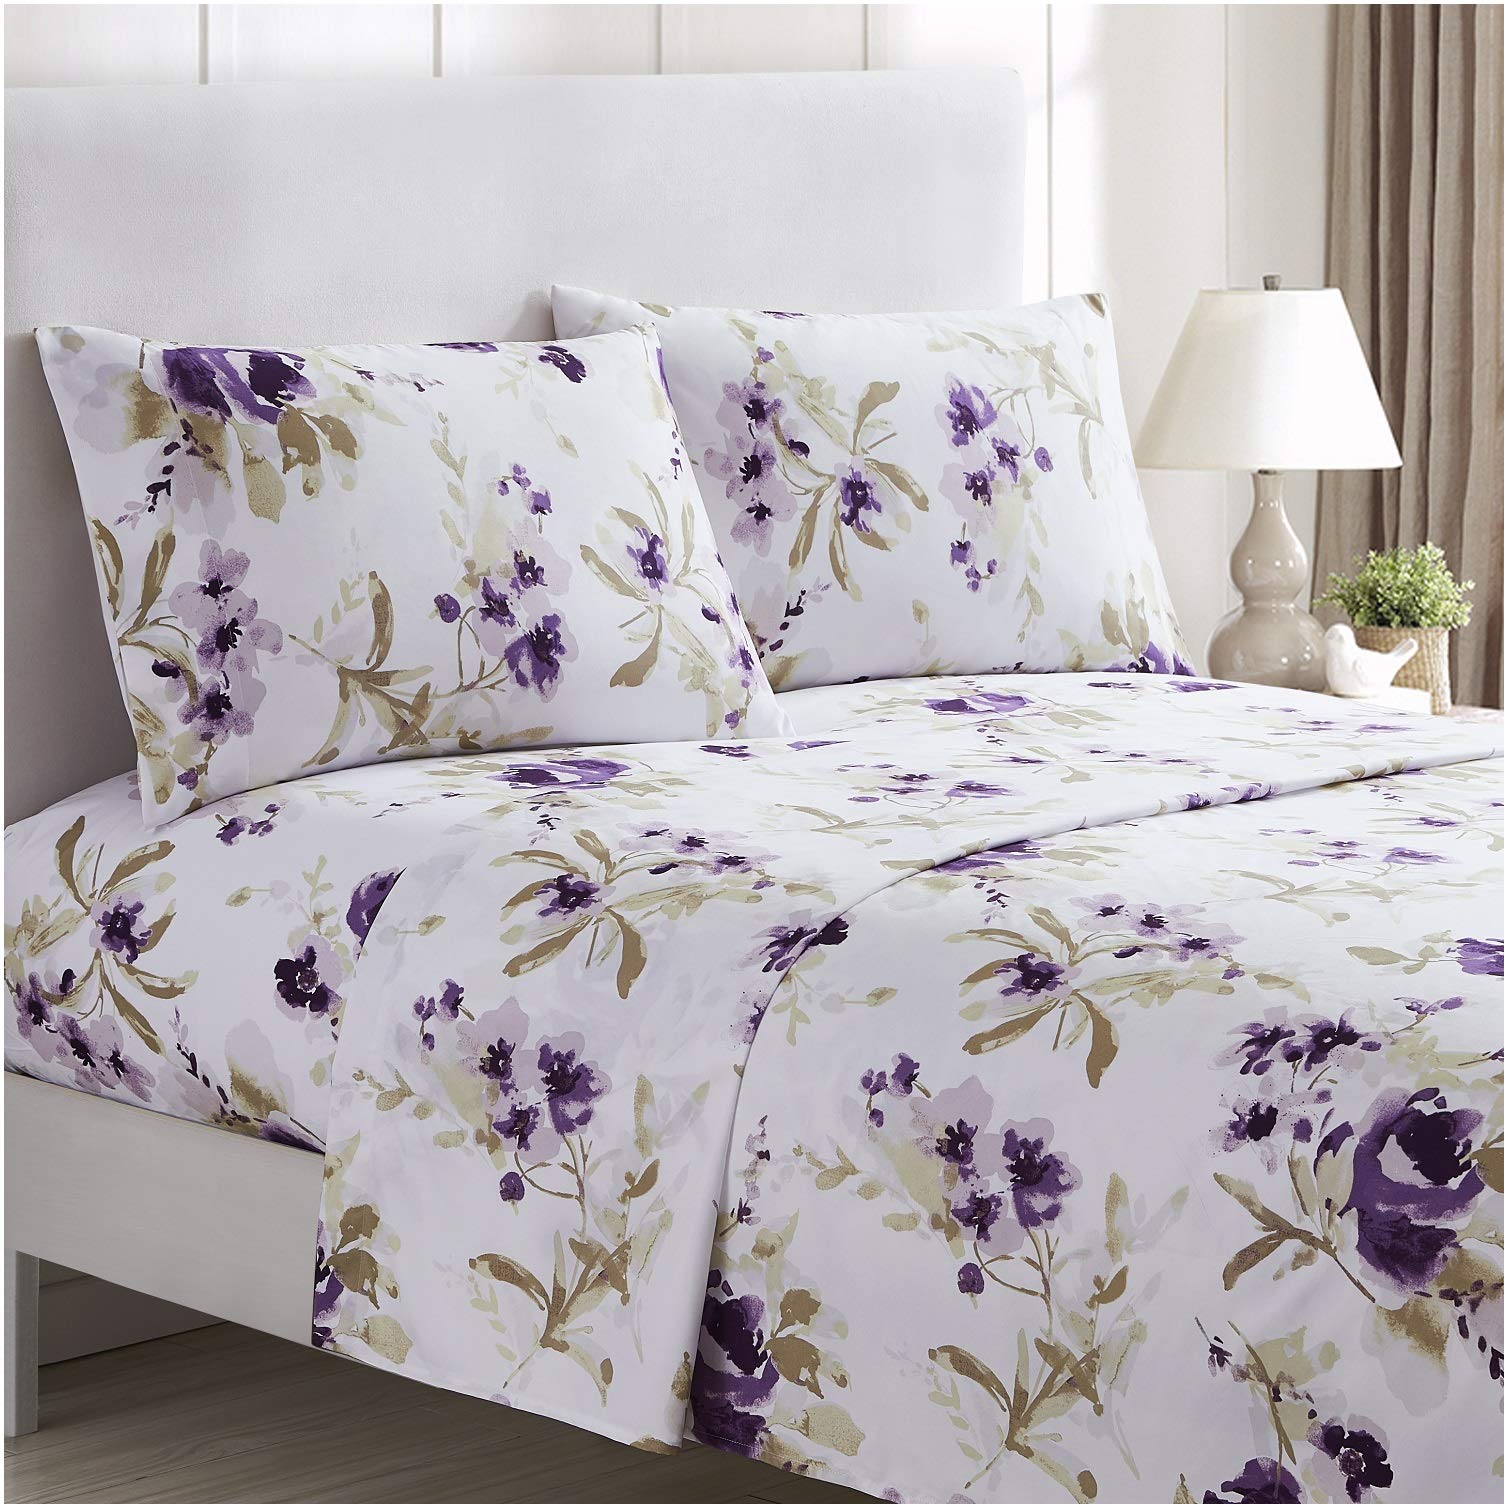 Book Cover Mellanni Queen Sheet Set - 4 Piece Iconic Collection Bedding Sheets & Pillowcases - Extra Soft, Cooling Bed Sheets - Deep Pocket up to 16 inch - Wrinkle, Fade, Stain Resistant (Queen, Madison Purple) Queen Madison Purple